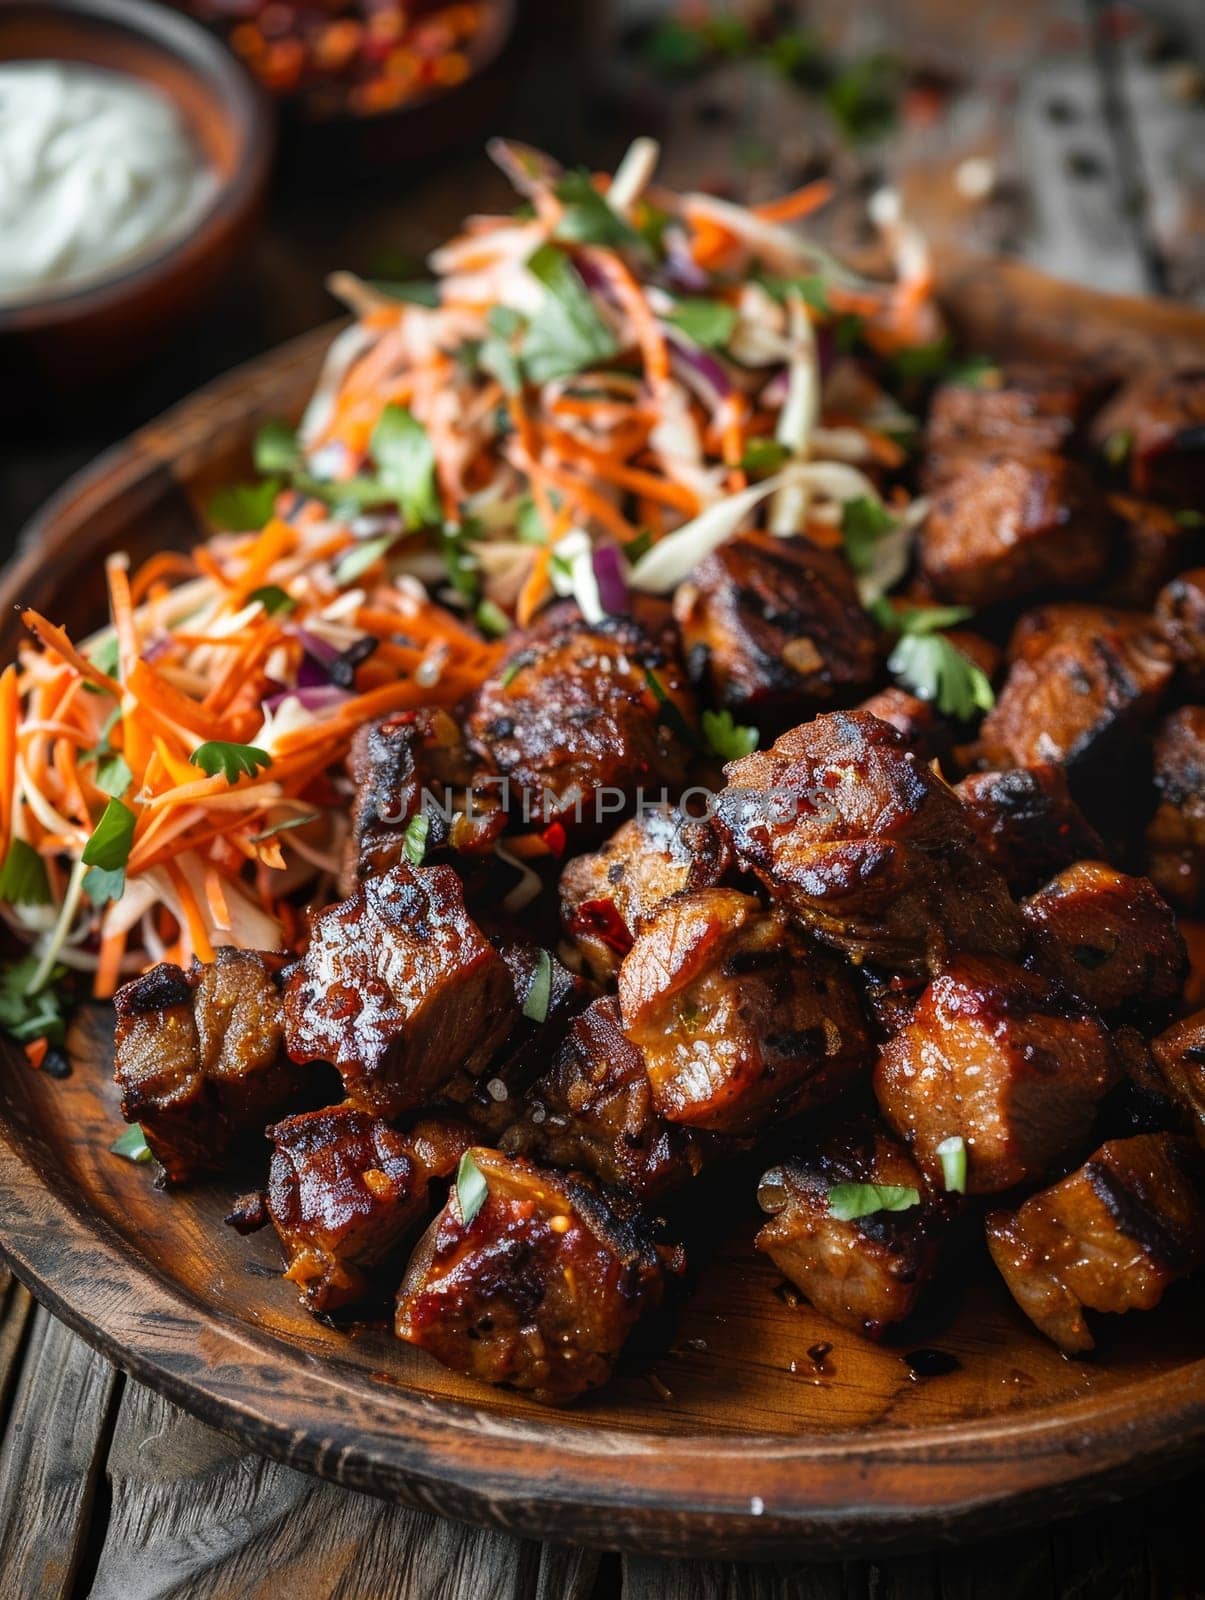 Authentic Haitian griot, marinated and fried pork cubes, served on a tray with a vibrant spicy slaw - a mouthwatering representation of the rich culinary heritage and flavors of the Caribbean